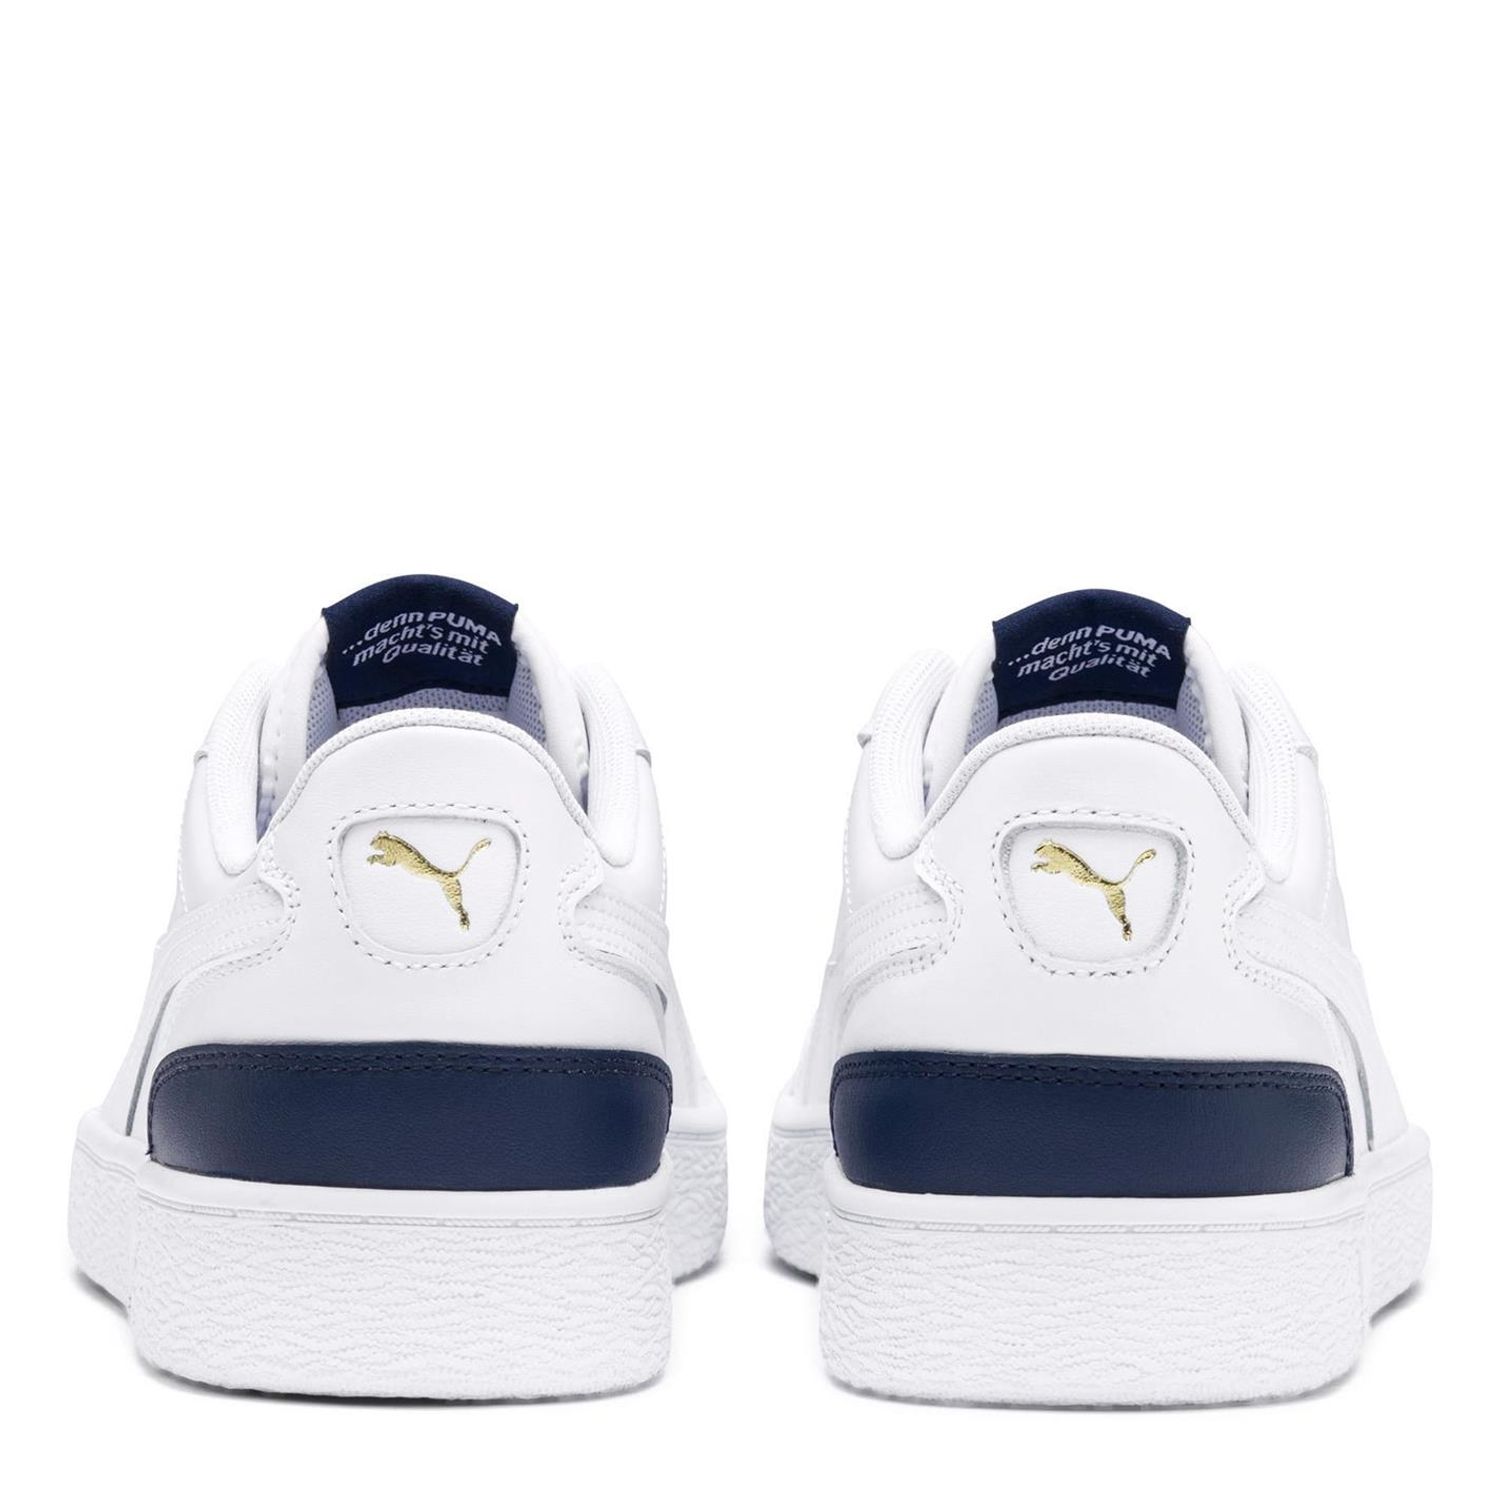 White Puma Sportstyle Ralph Sampson Low Trainers - Get The Label